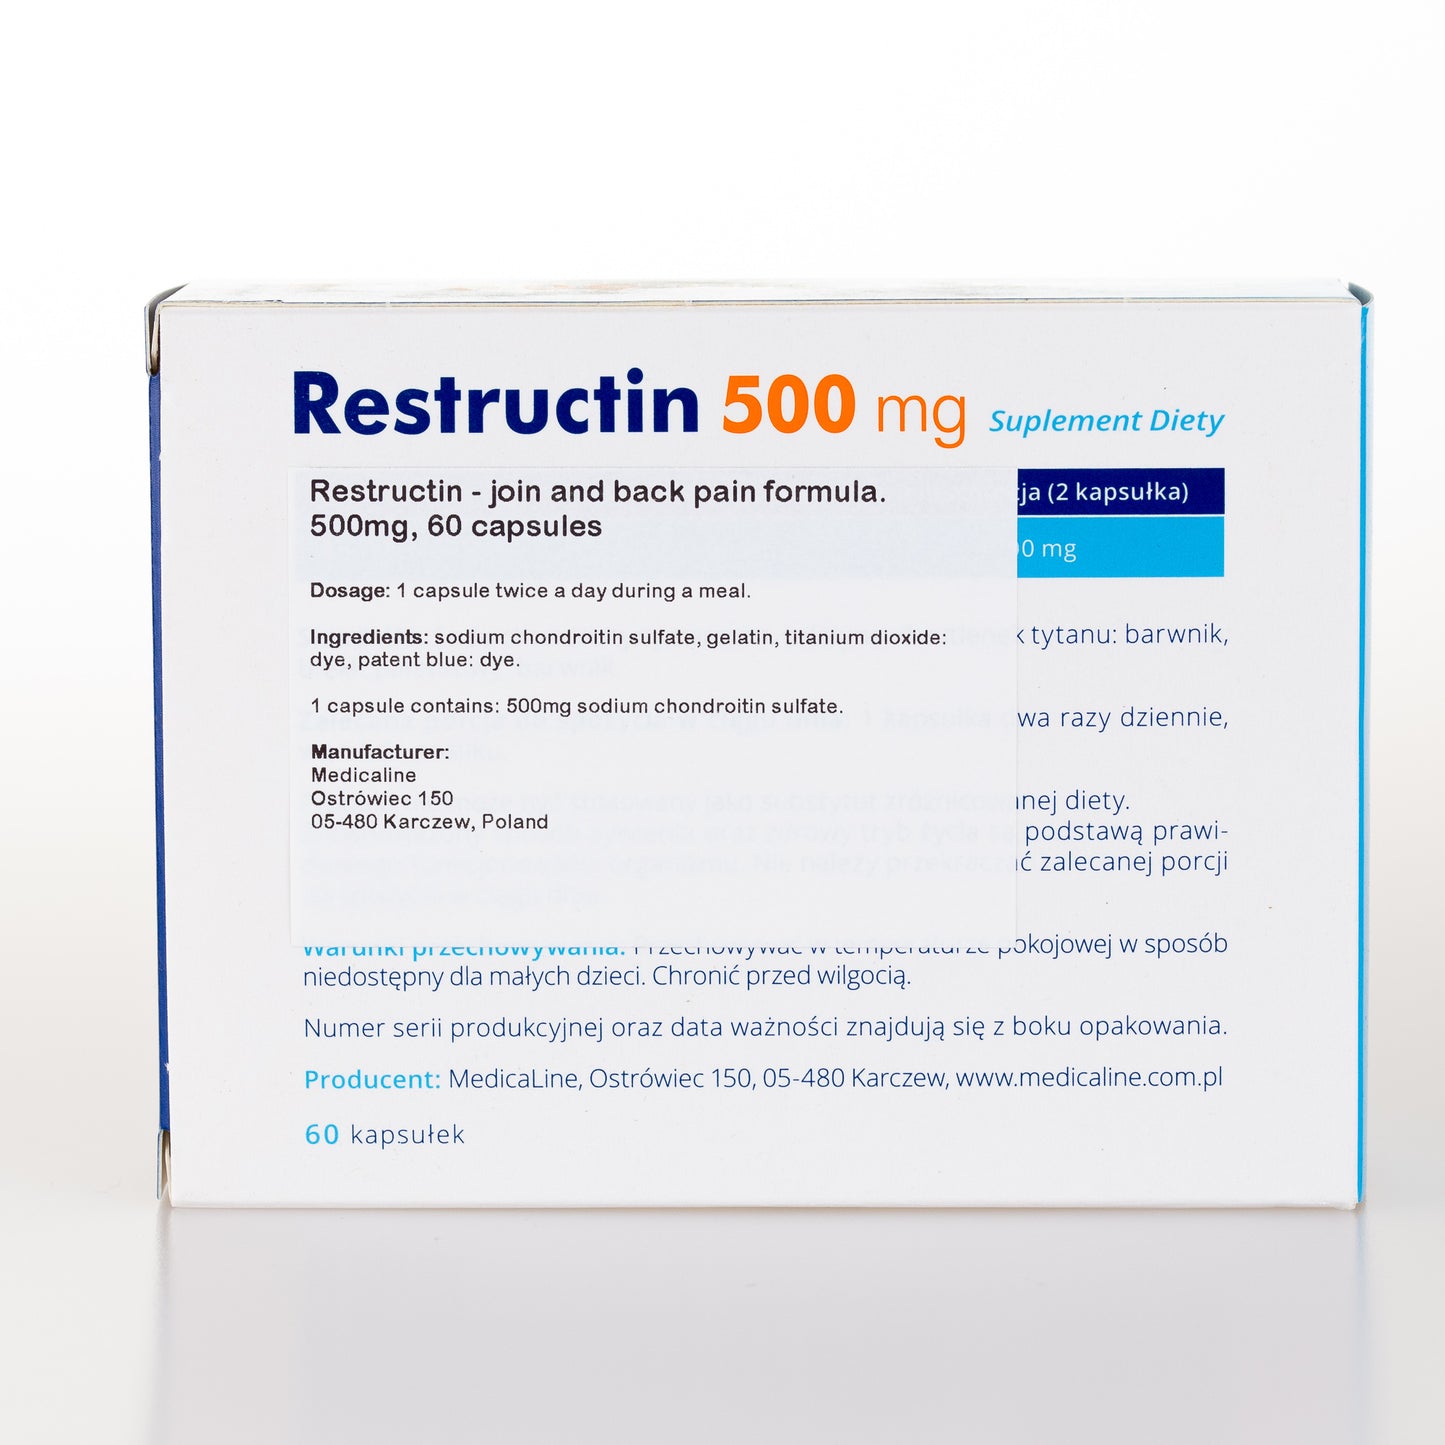 Restructin - join and back pain formula. 500mg, 60 capsules, Chondroitin Sulfate